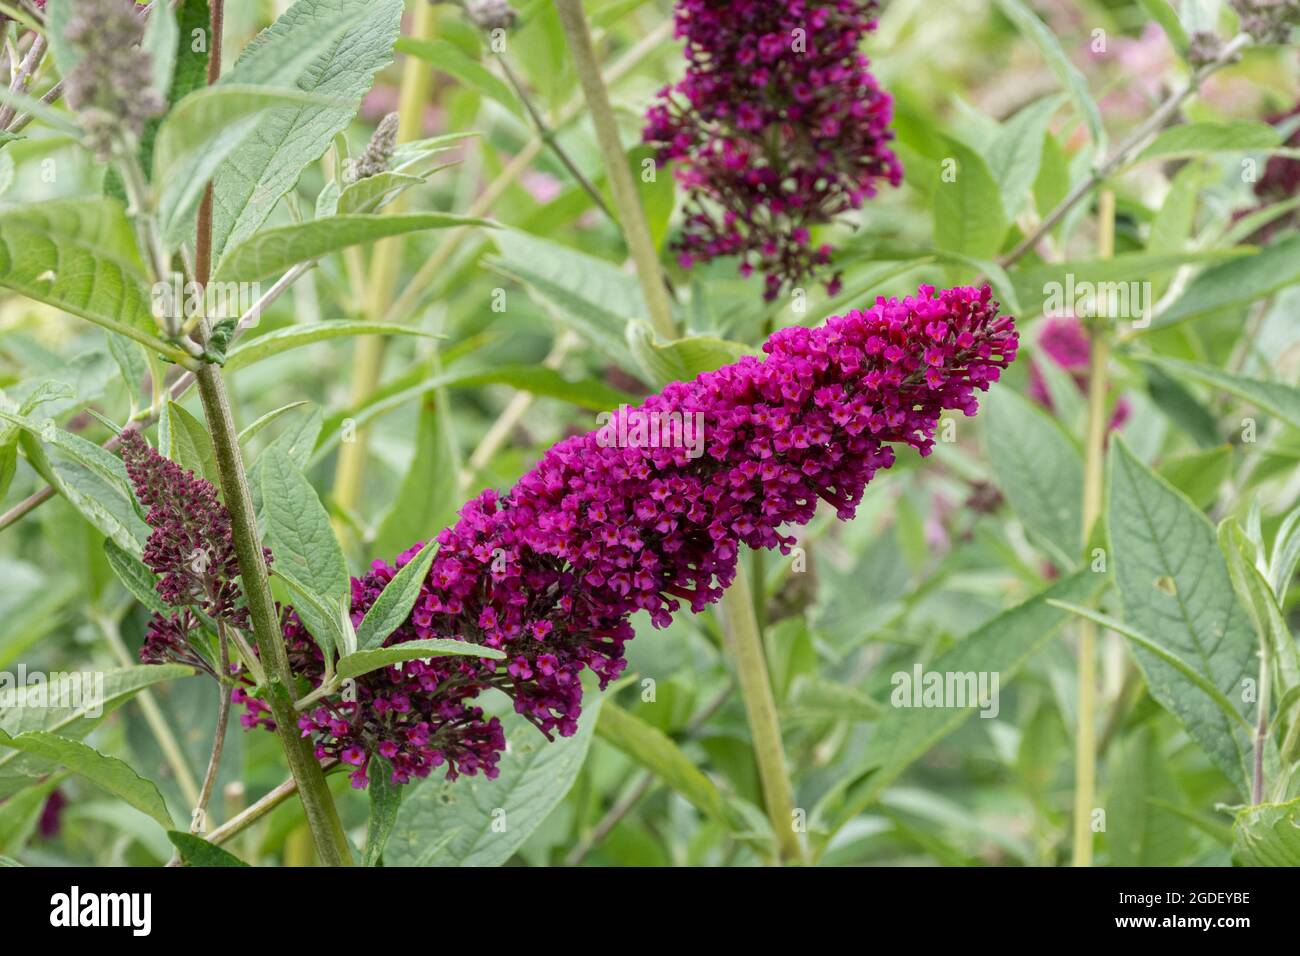 Buddleja davidii 'Buzz Velvet' (buddleia variety), known as a butterfly bush, in flower during august or summer, UK Stock Photo